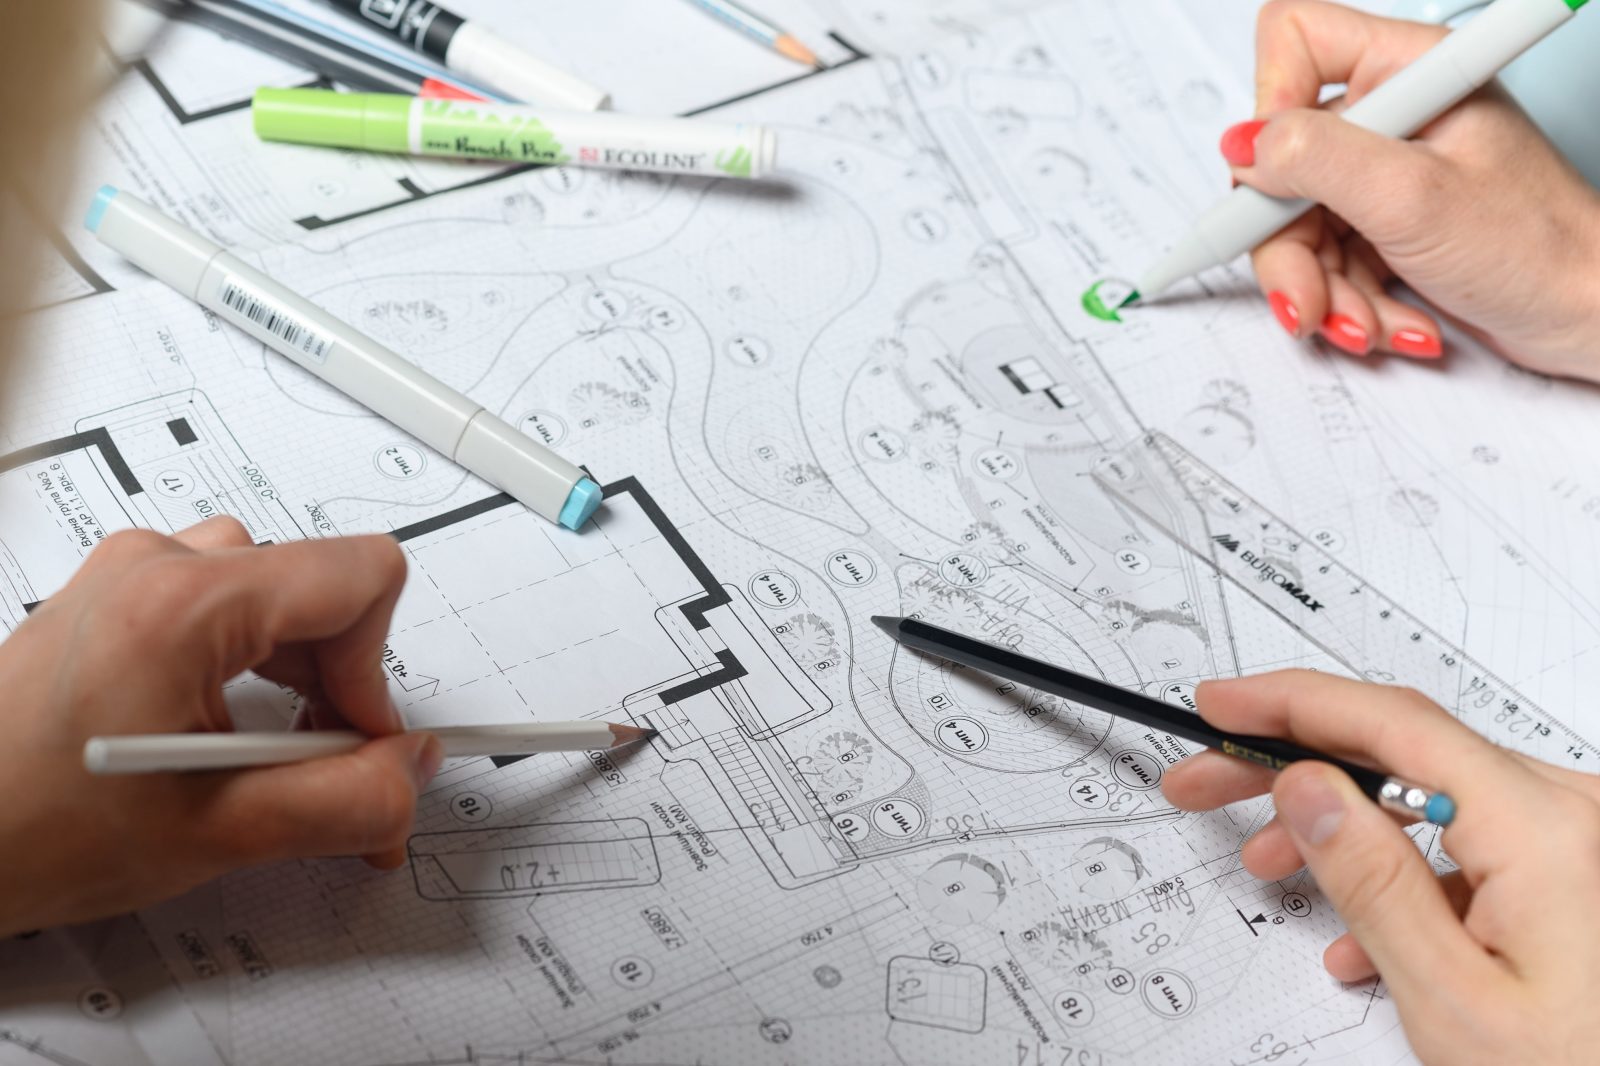 Design project management: what the studio is actually responsible